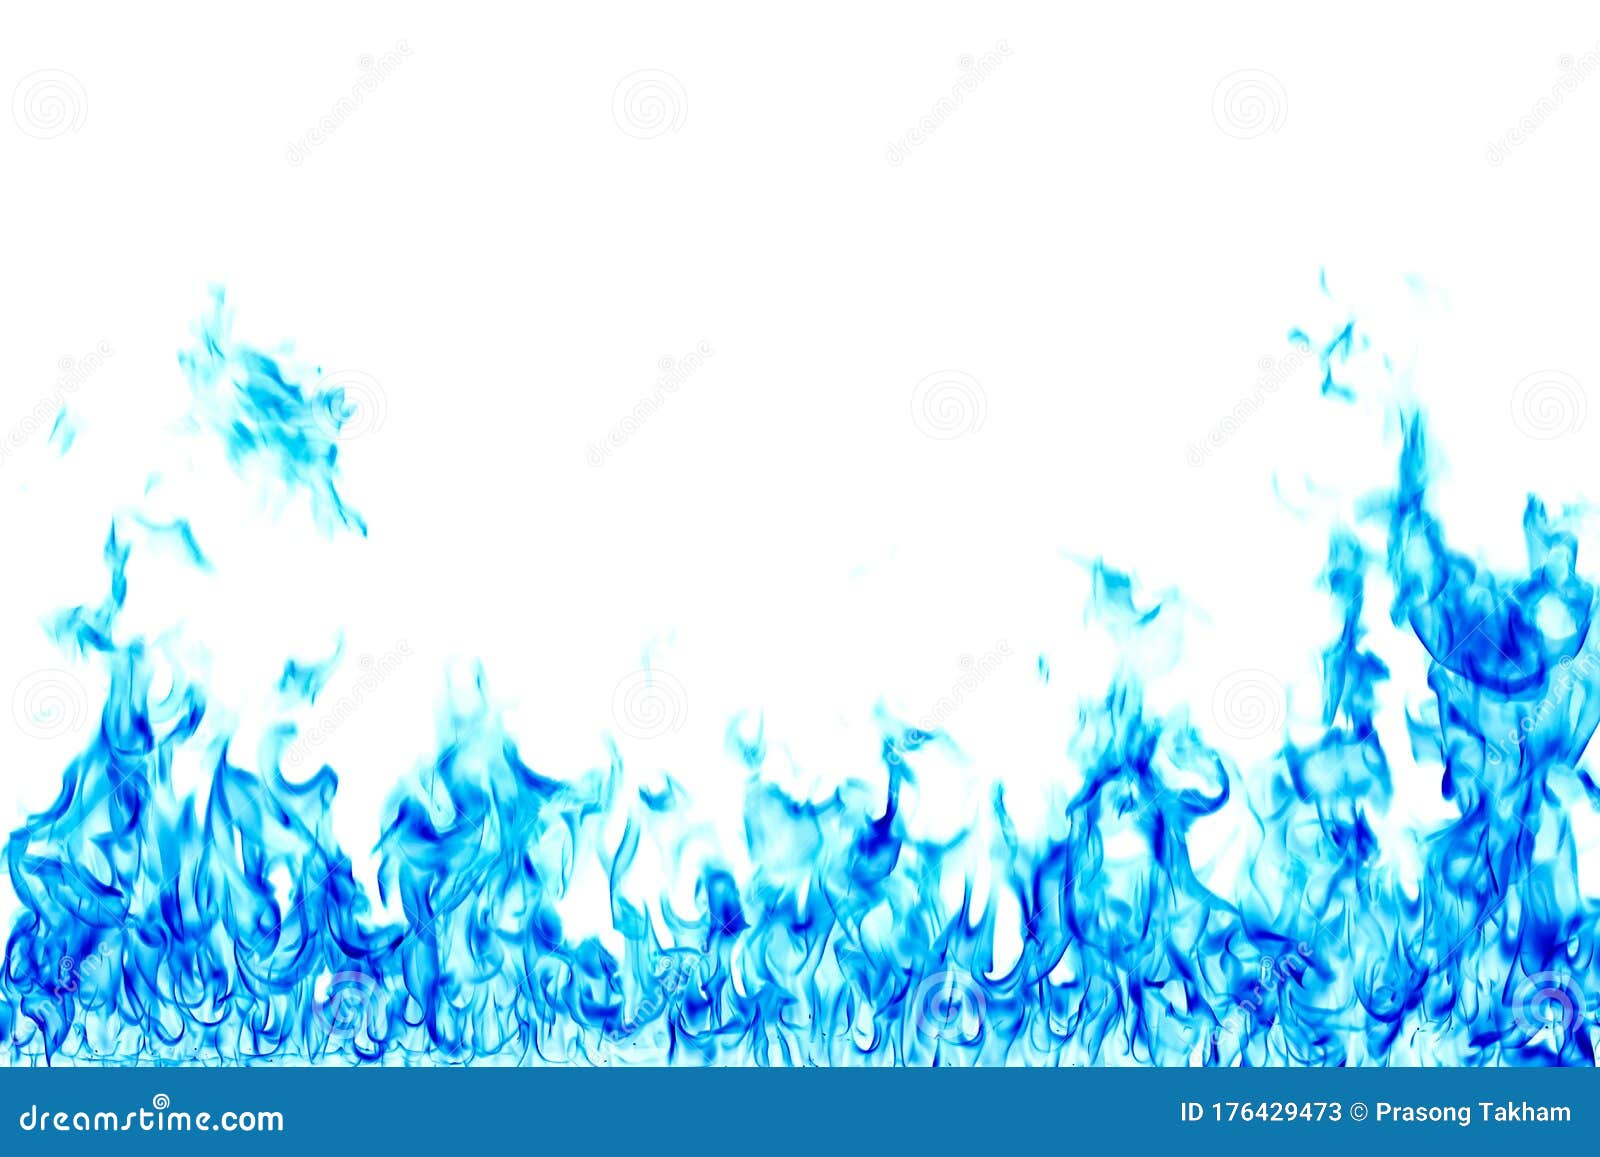 Blue Flame on a White Background Stock Image - Image of flames, detail:  176429473